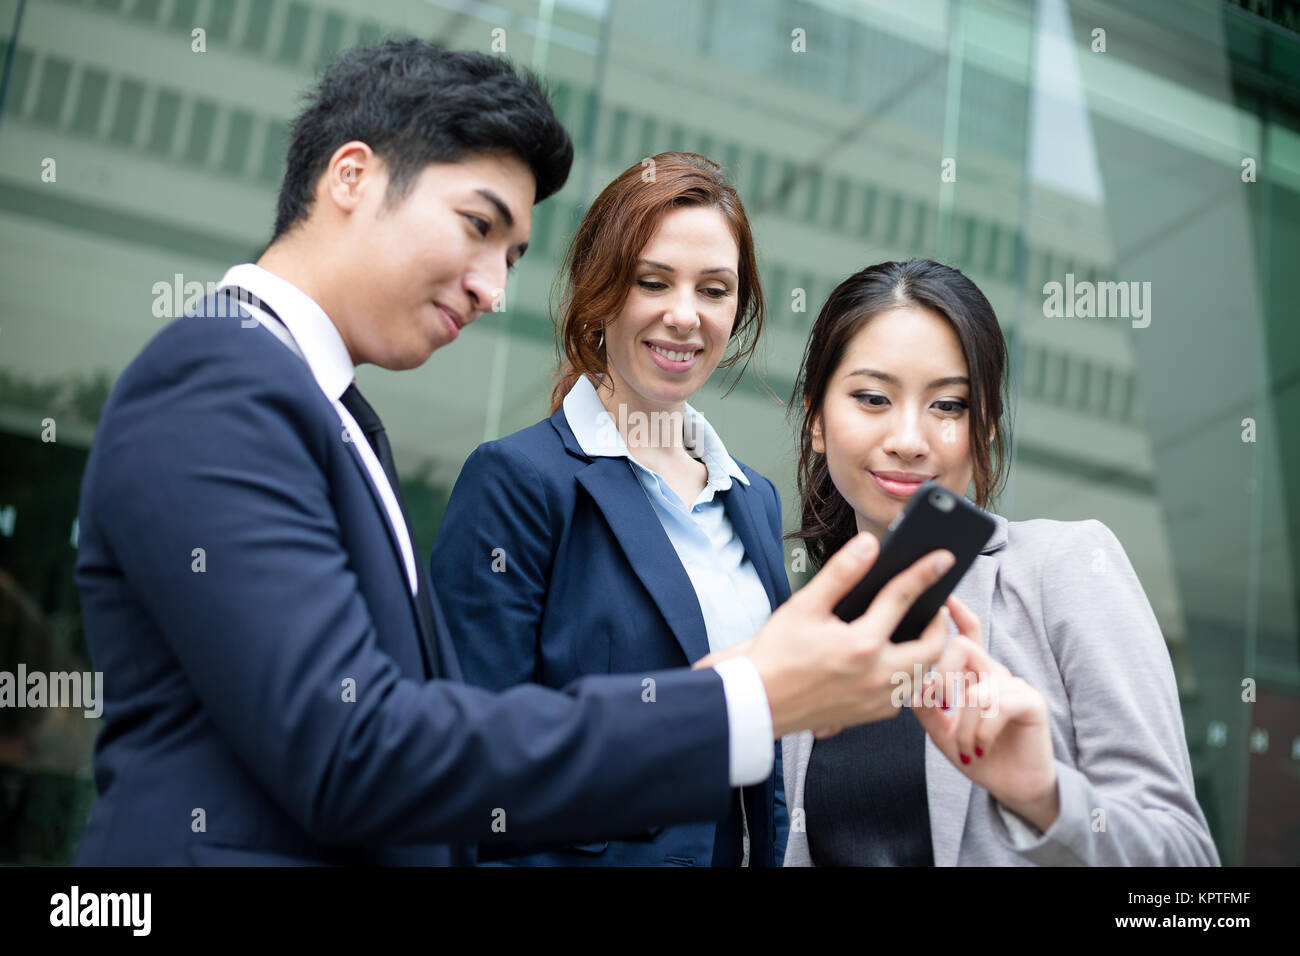 Business people discuss on cellphone Stock Photo